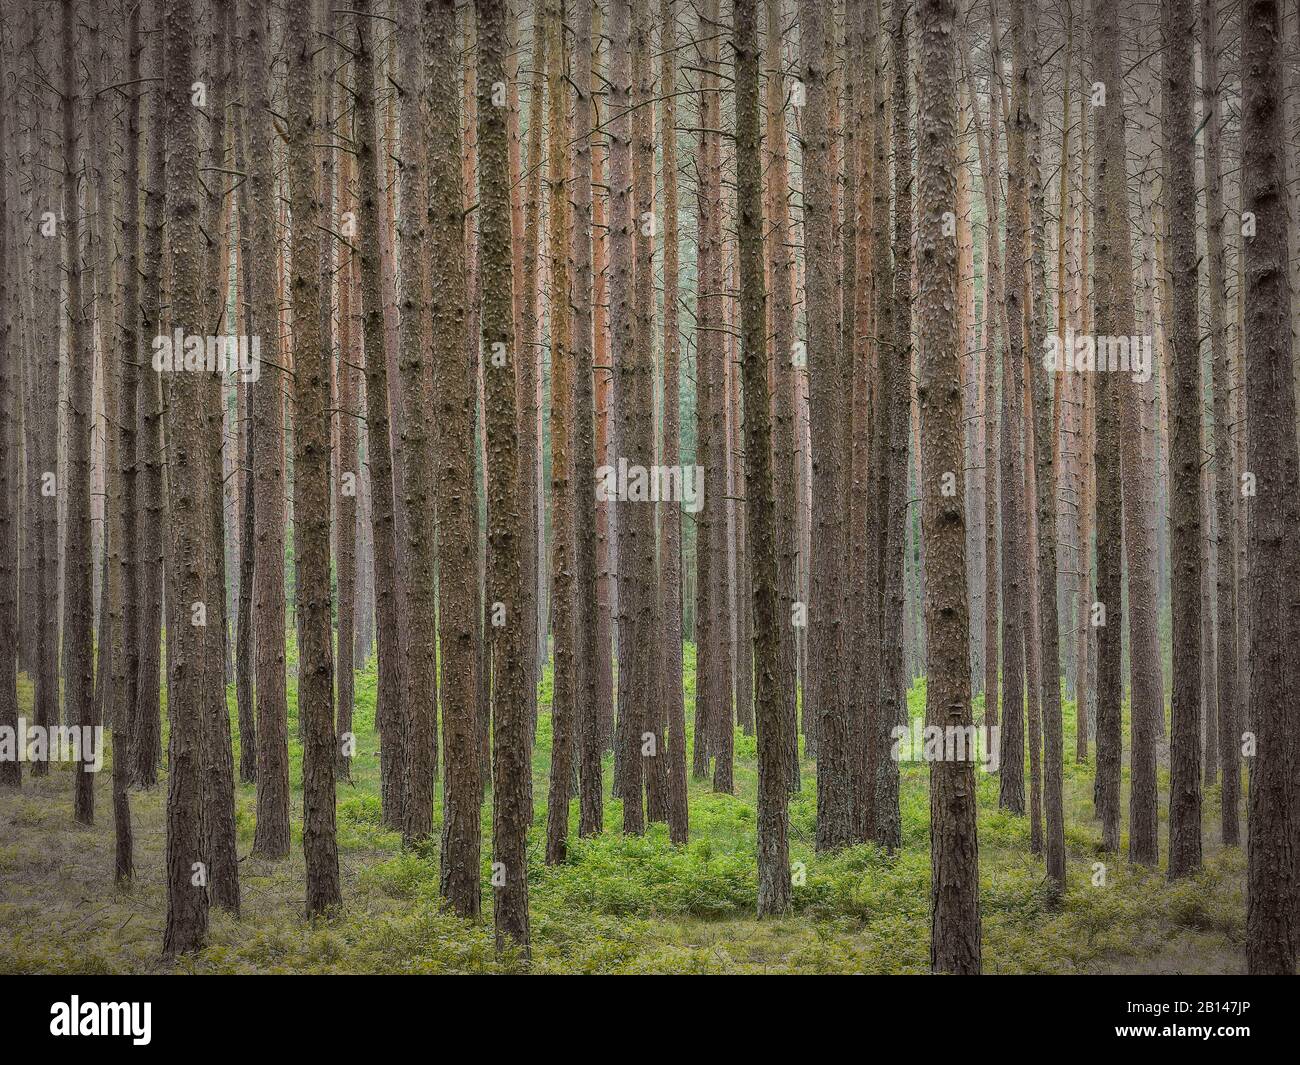 Coniferous forest, tree trunks, detail Stock Photo